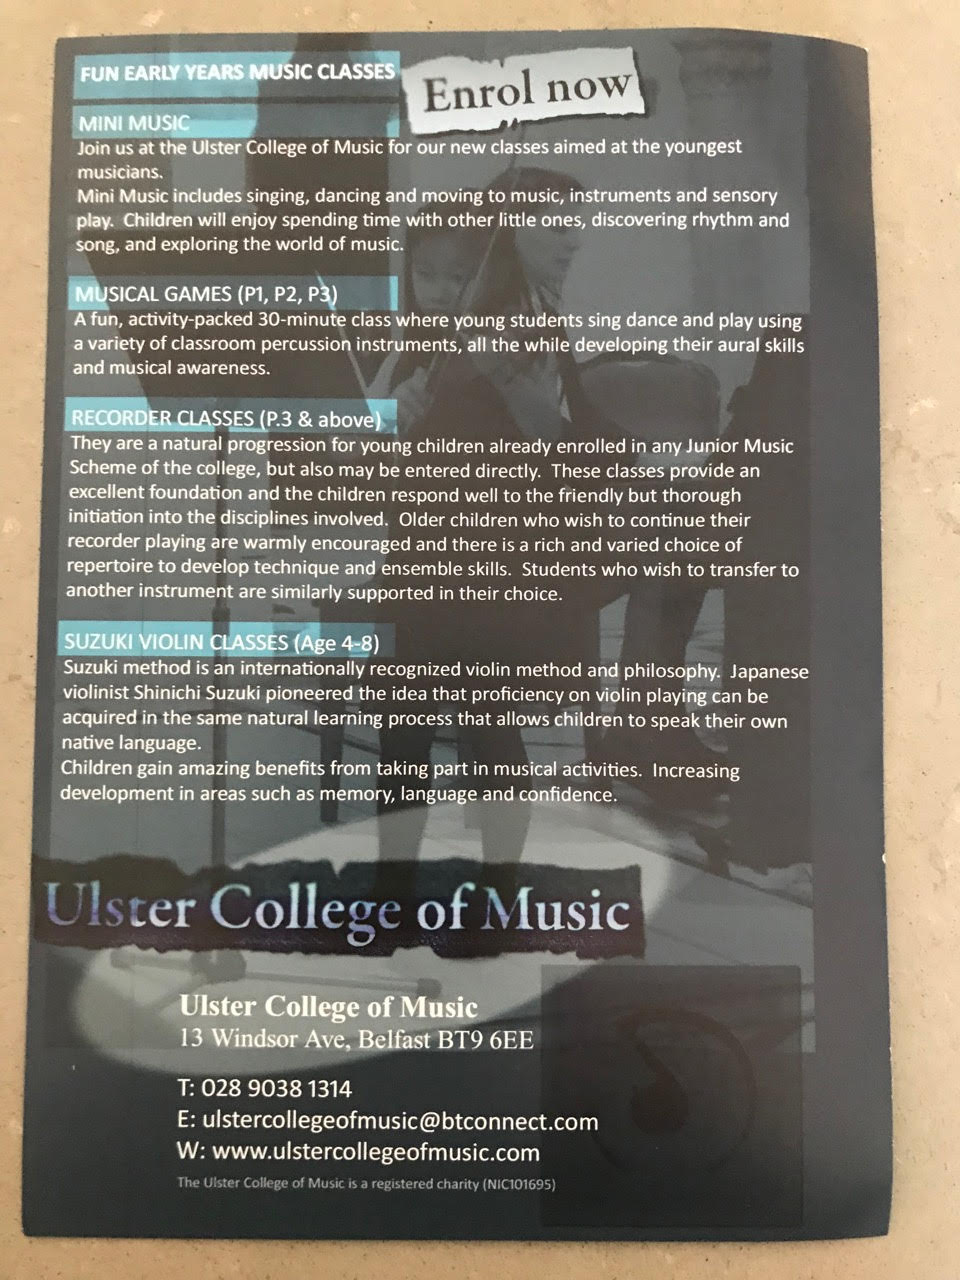 Saturday Morning Music Classes At The Ulster College Of Music